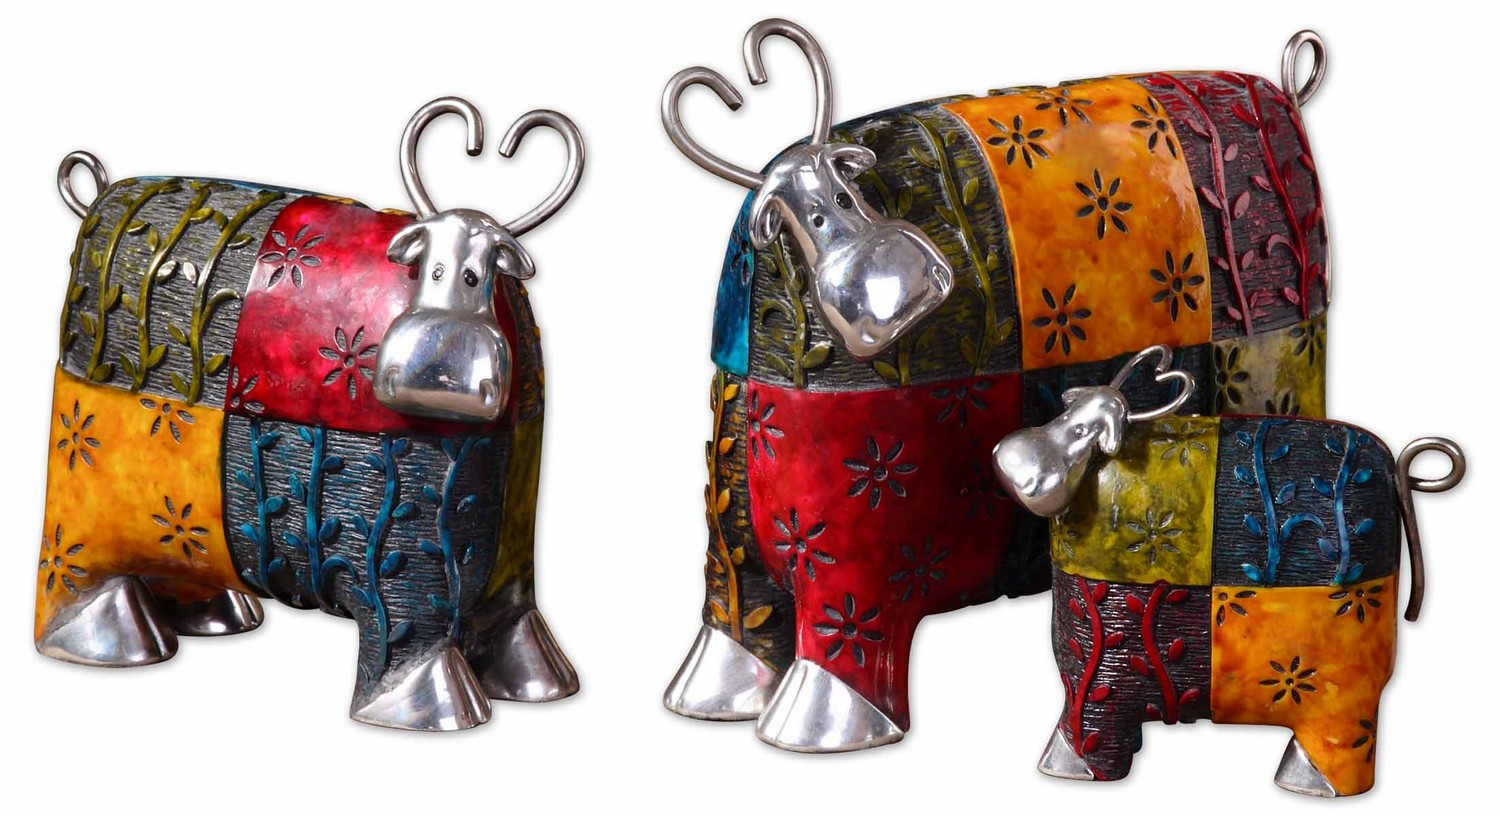 Uttermost Colorful Cows Metal Figurines - Set of 3